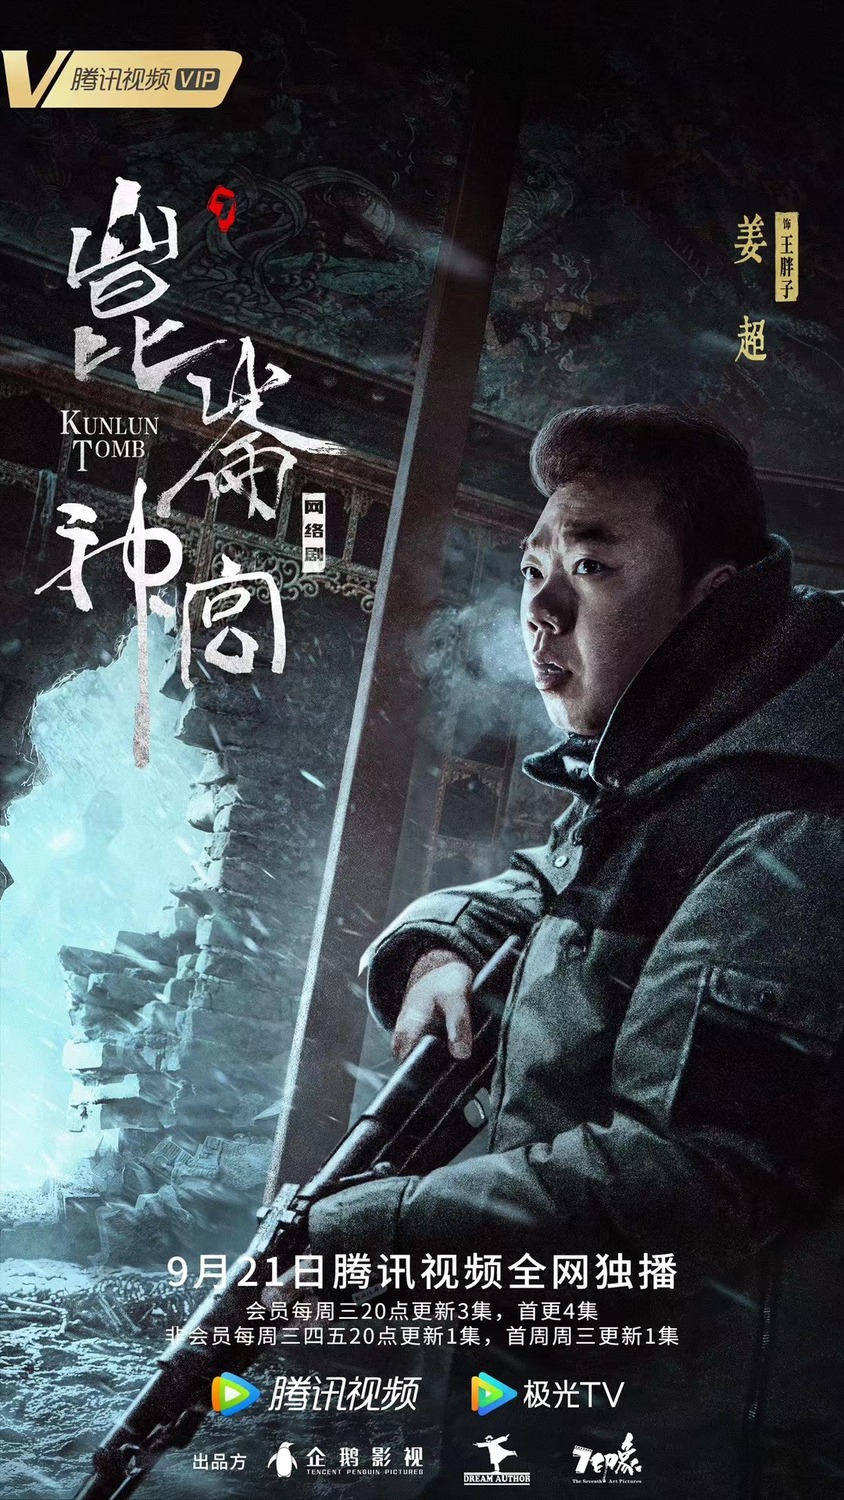 Extra Large TV Poster Image for Candle in the Tomb: Kunlun Tomb (#4 of 8)